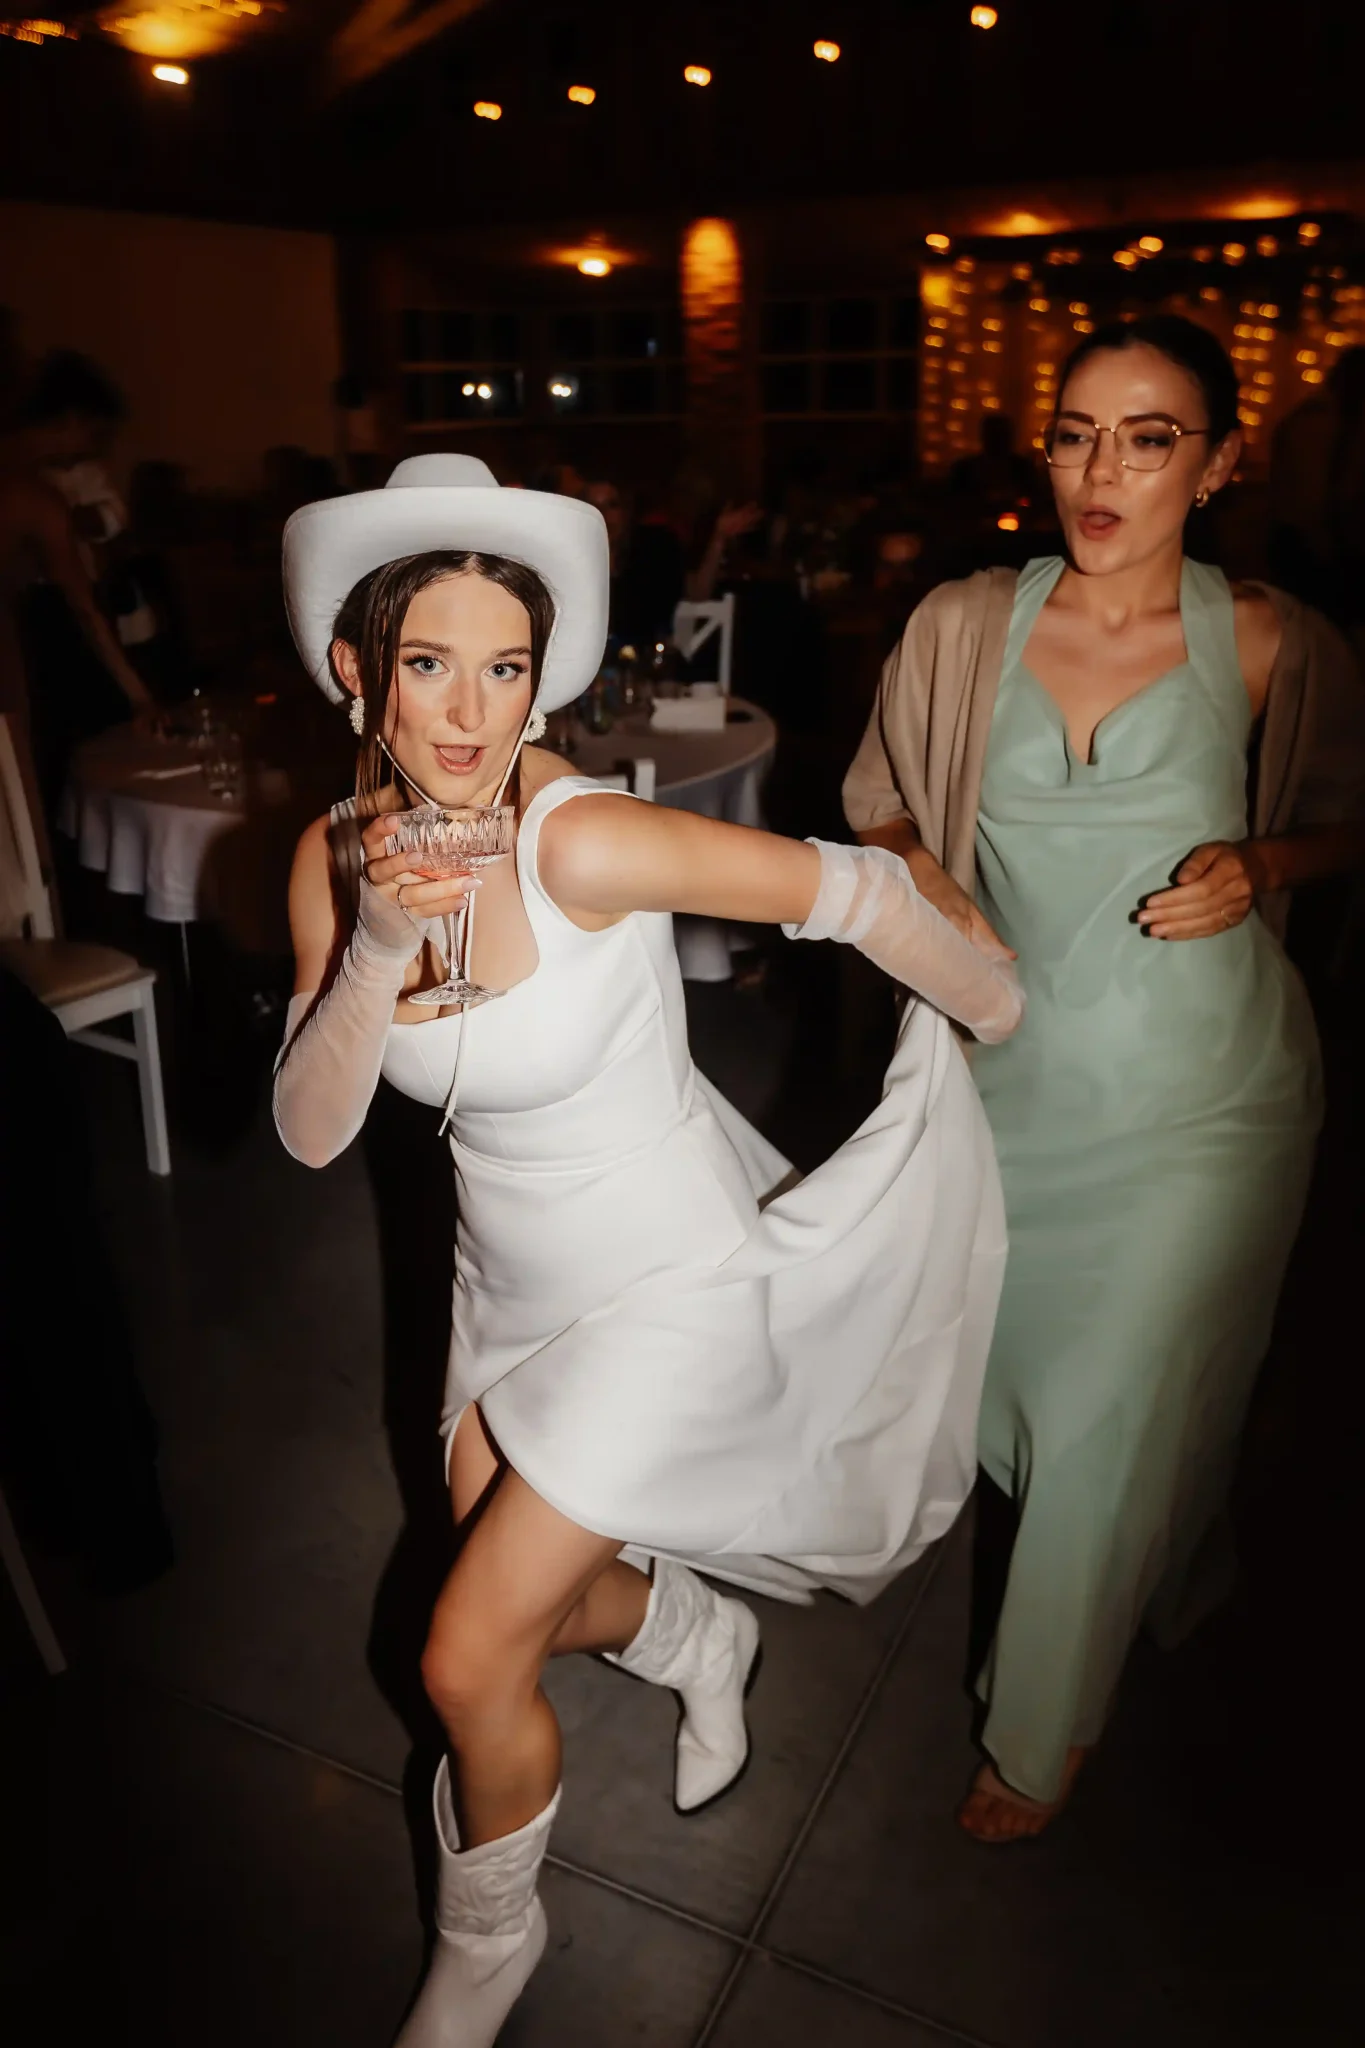 A woman in a white dress dancing with a woman in a cowboy hat.